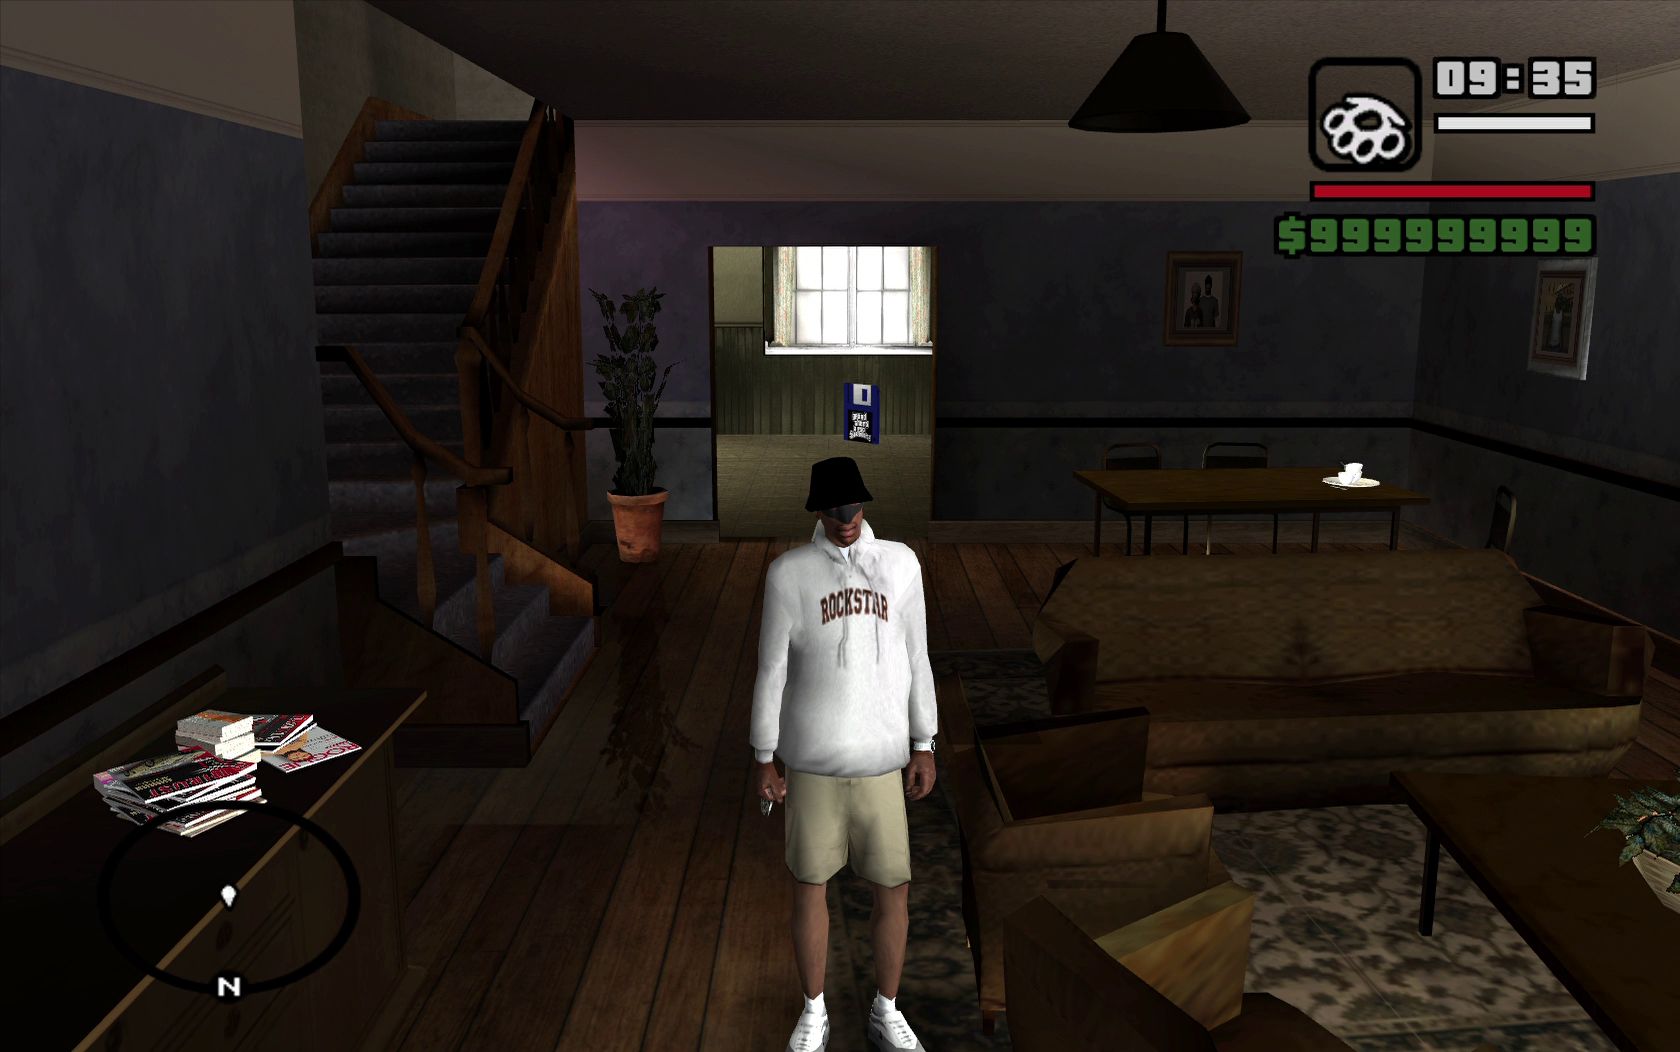 GTA San Andreas Gameplay After Skipping all missions- Image 1